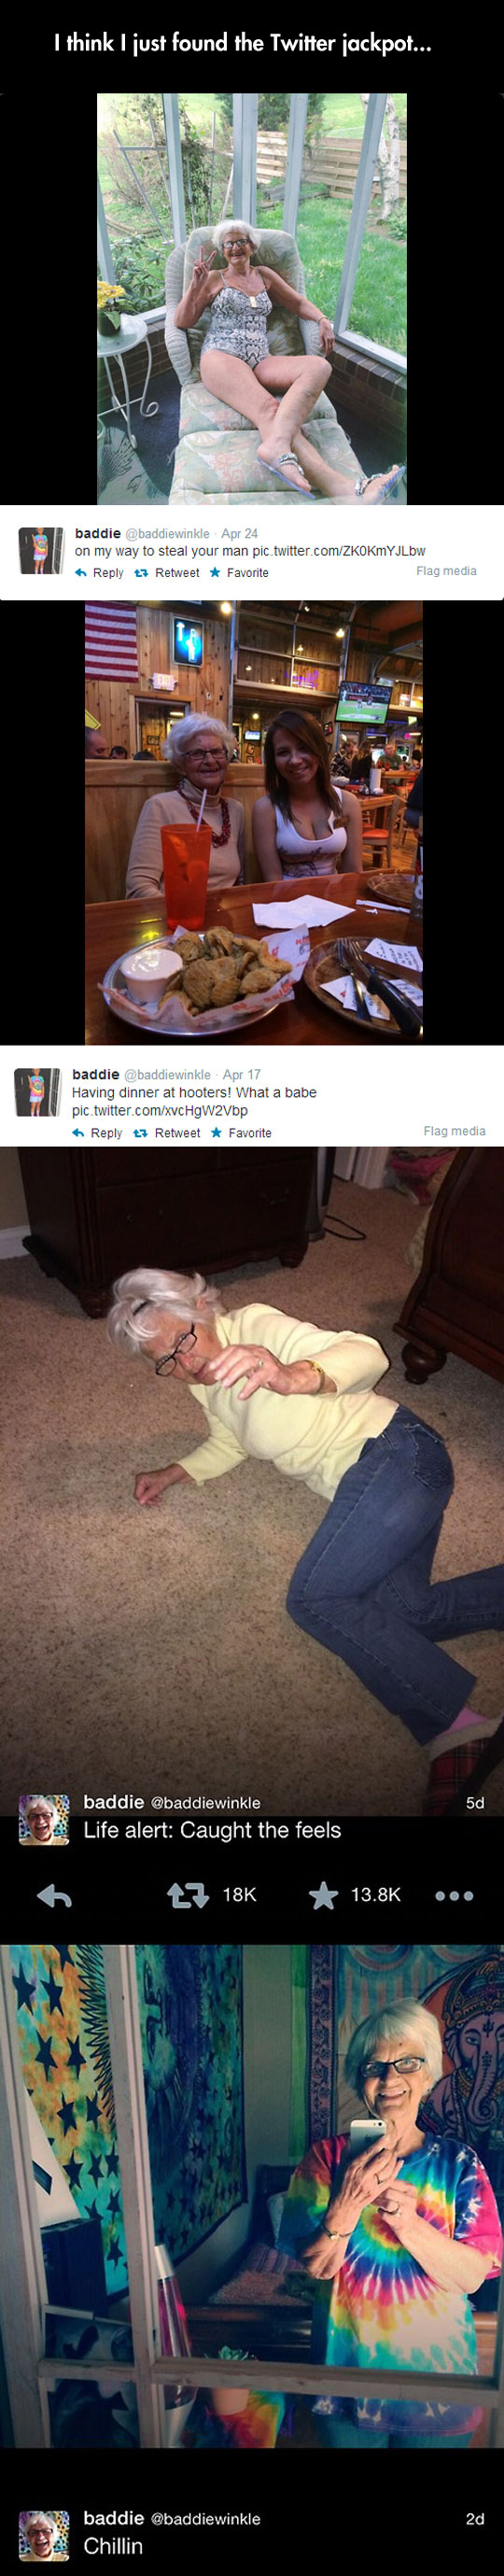 funny-picture-Twitter-old-lady-grandma-Instagram